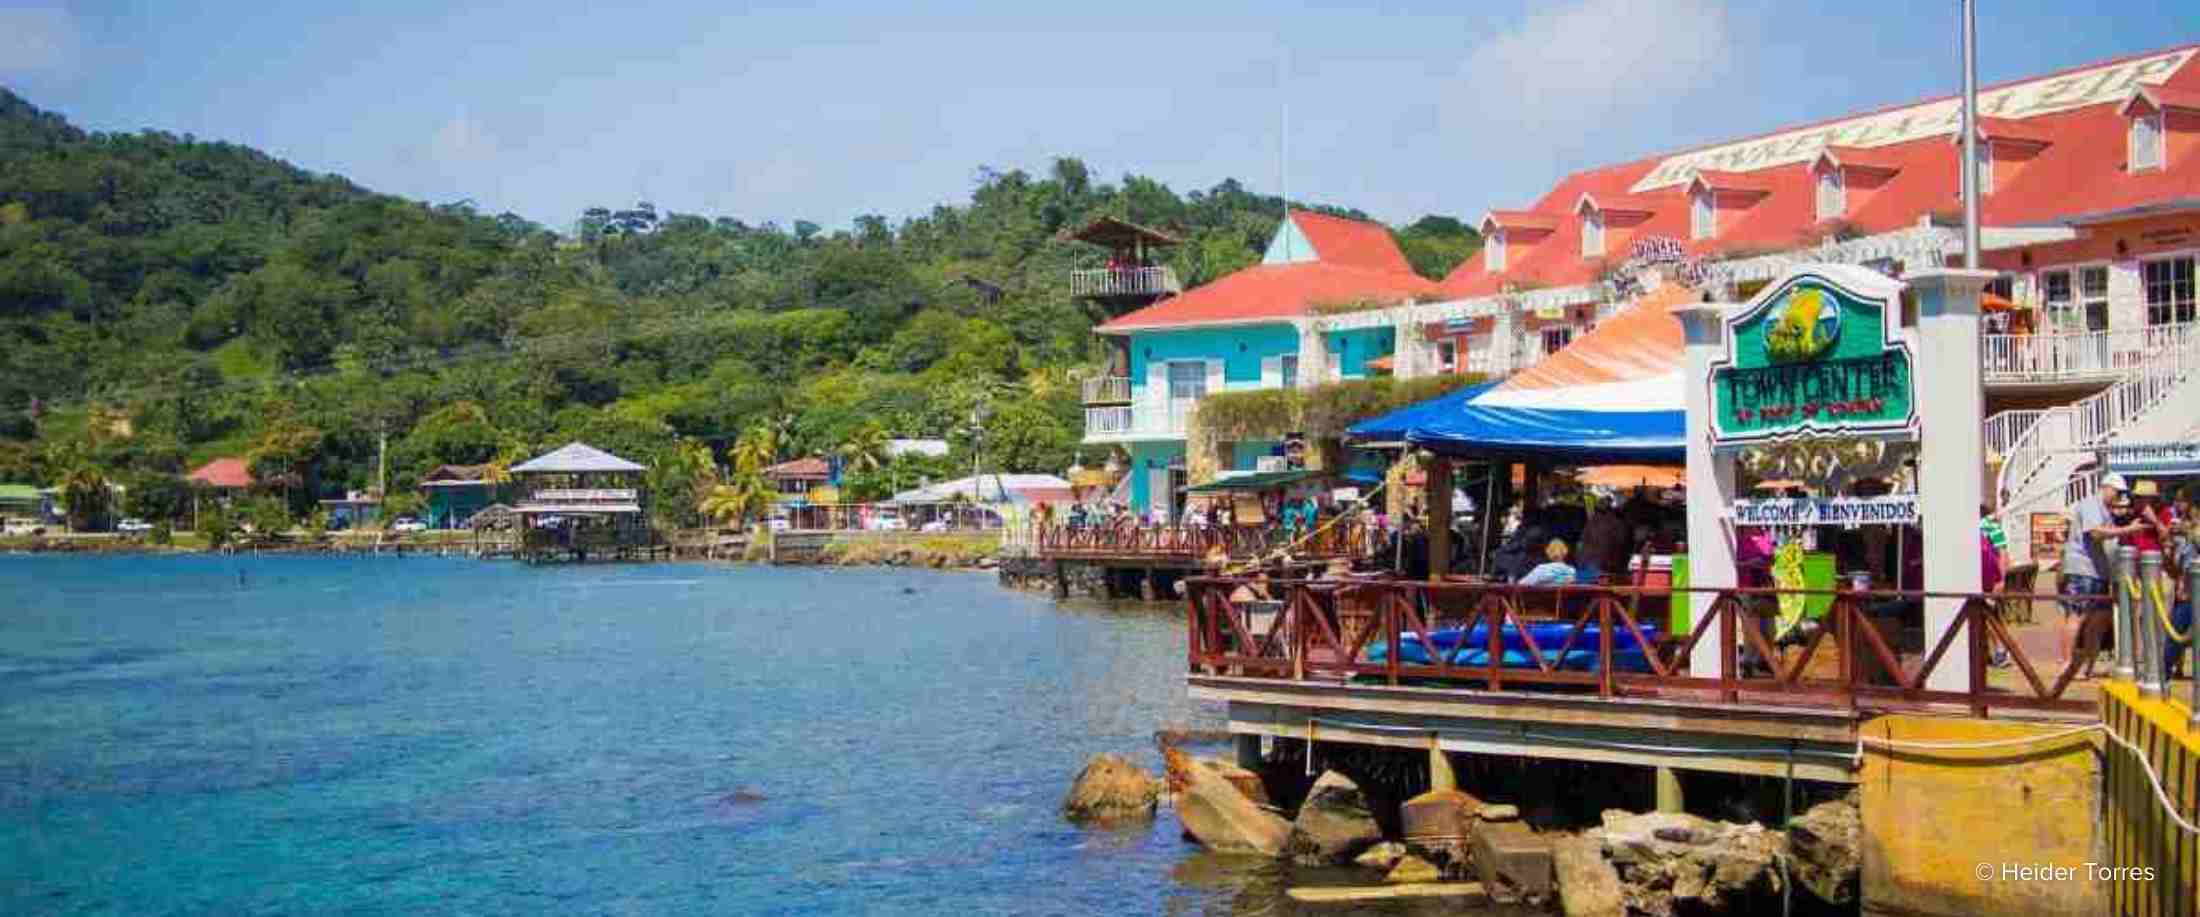 The tourist area of Roatan in Honduras receives the second-highest number of cruise ship arrivals in the country